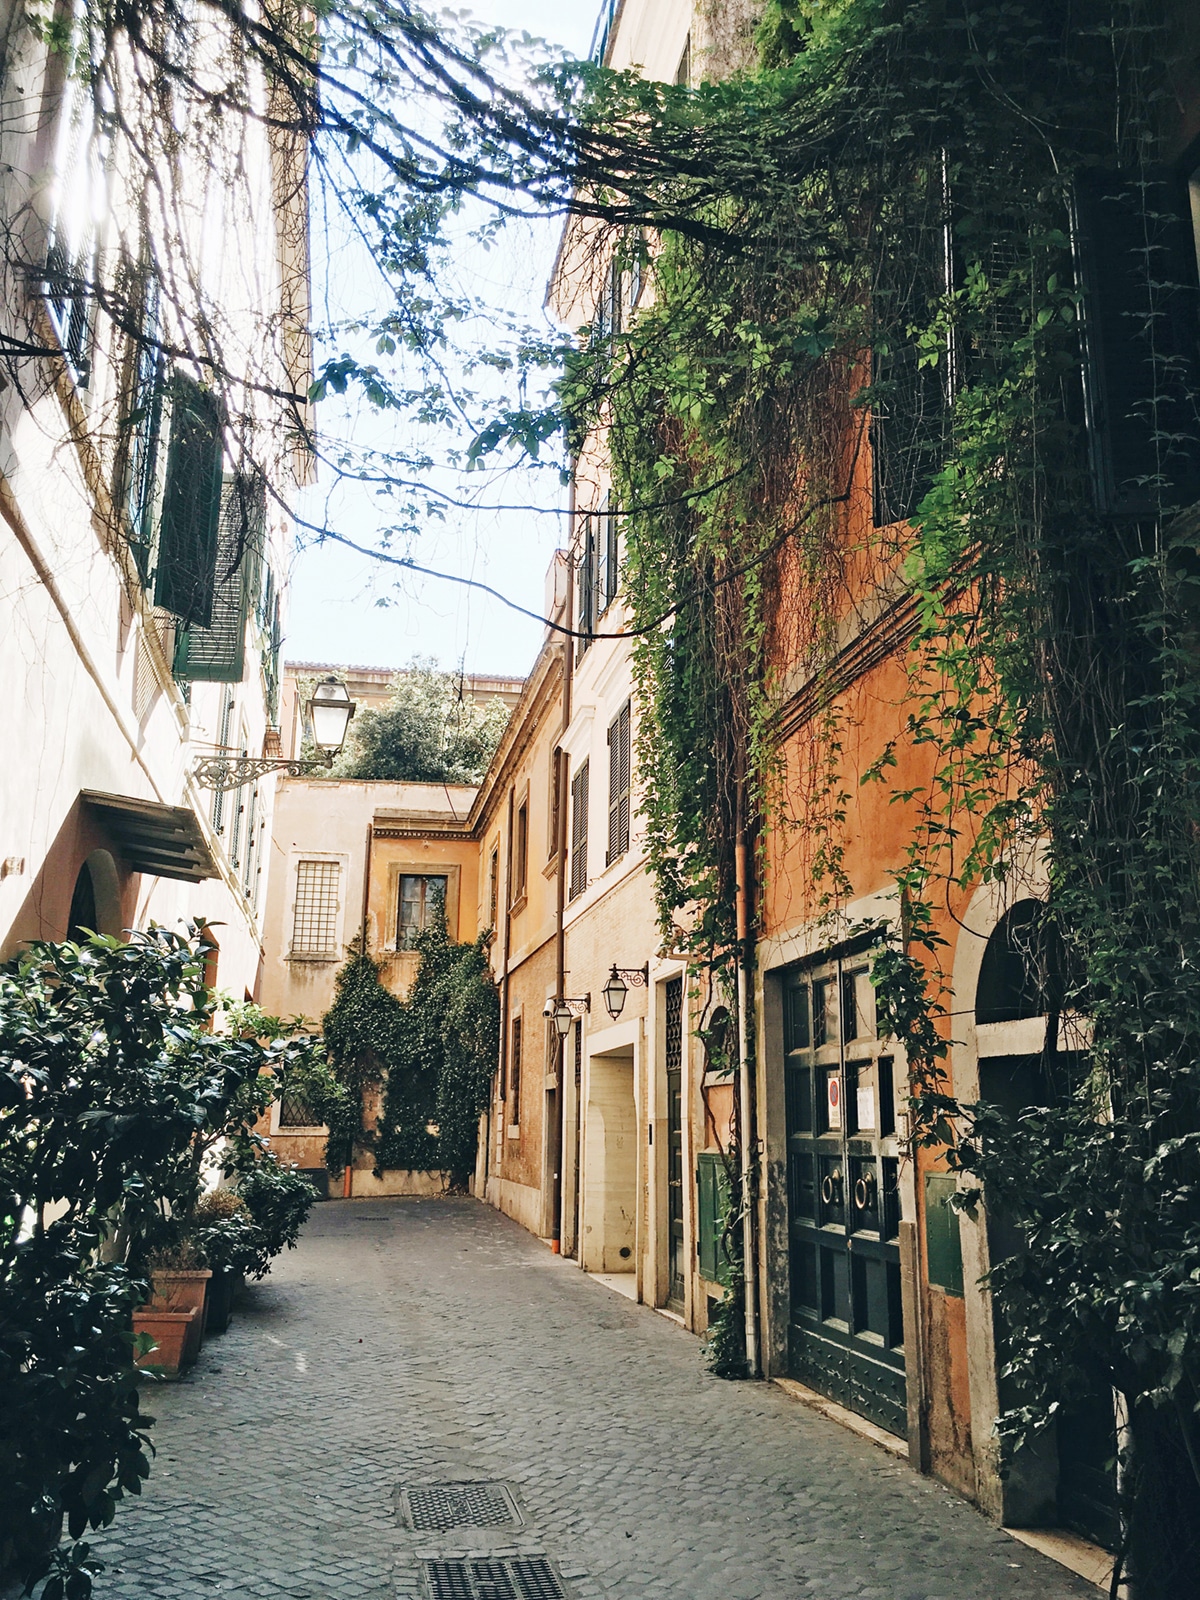 the alley way leading to our B&B was the most charming hidden spot | Rome travel guide from coco kelley